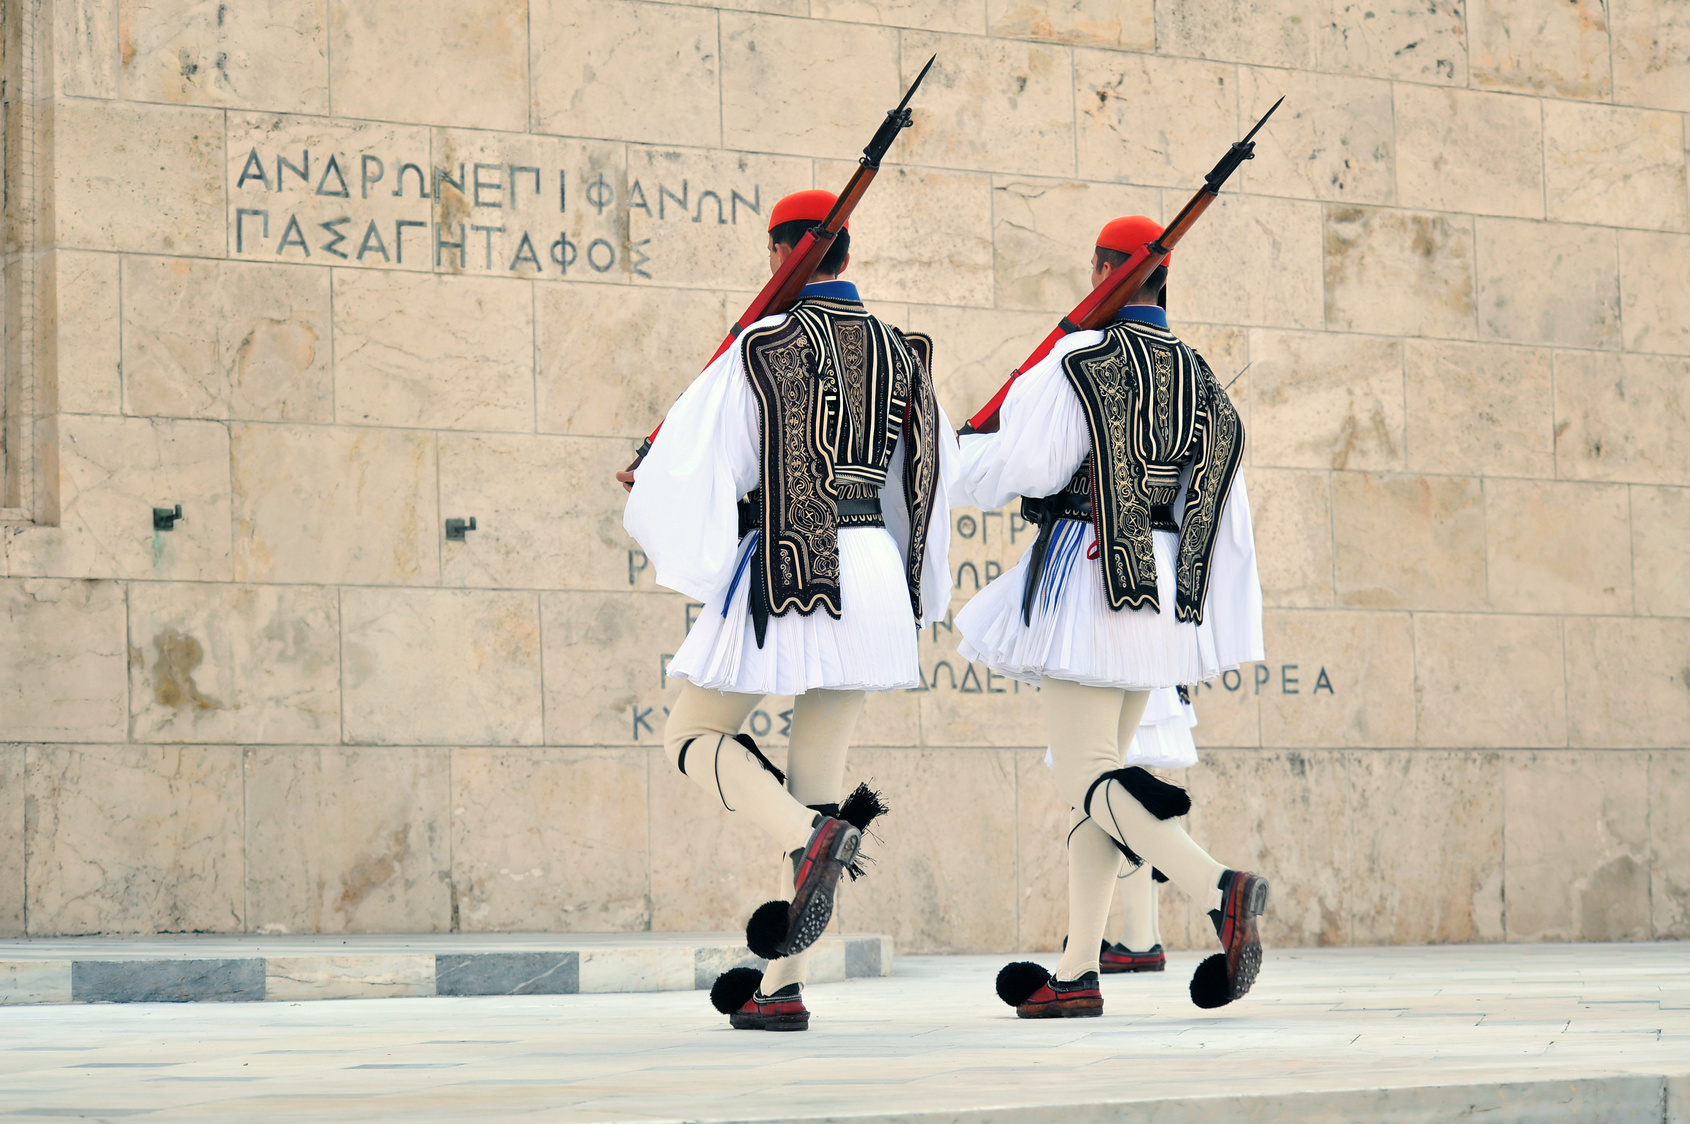 Soothe Your Eyes And Gain Historical Knowledge With The Beautiful Attractions In Athens